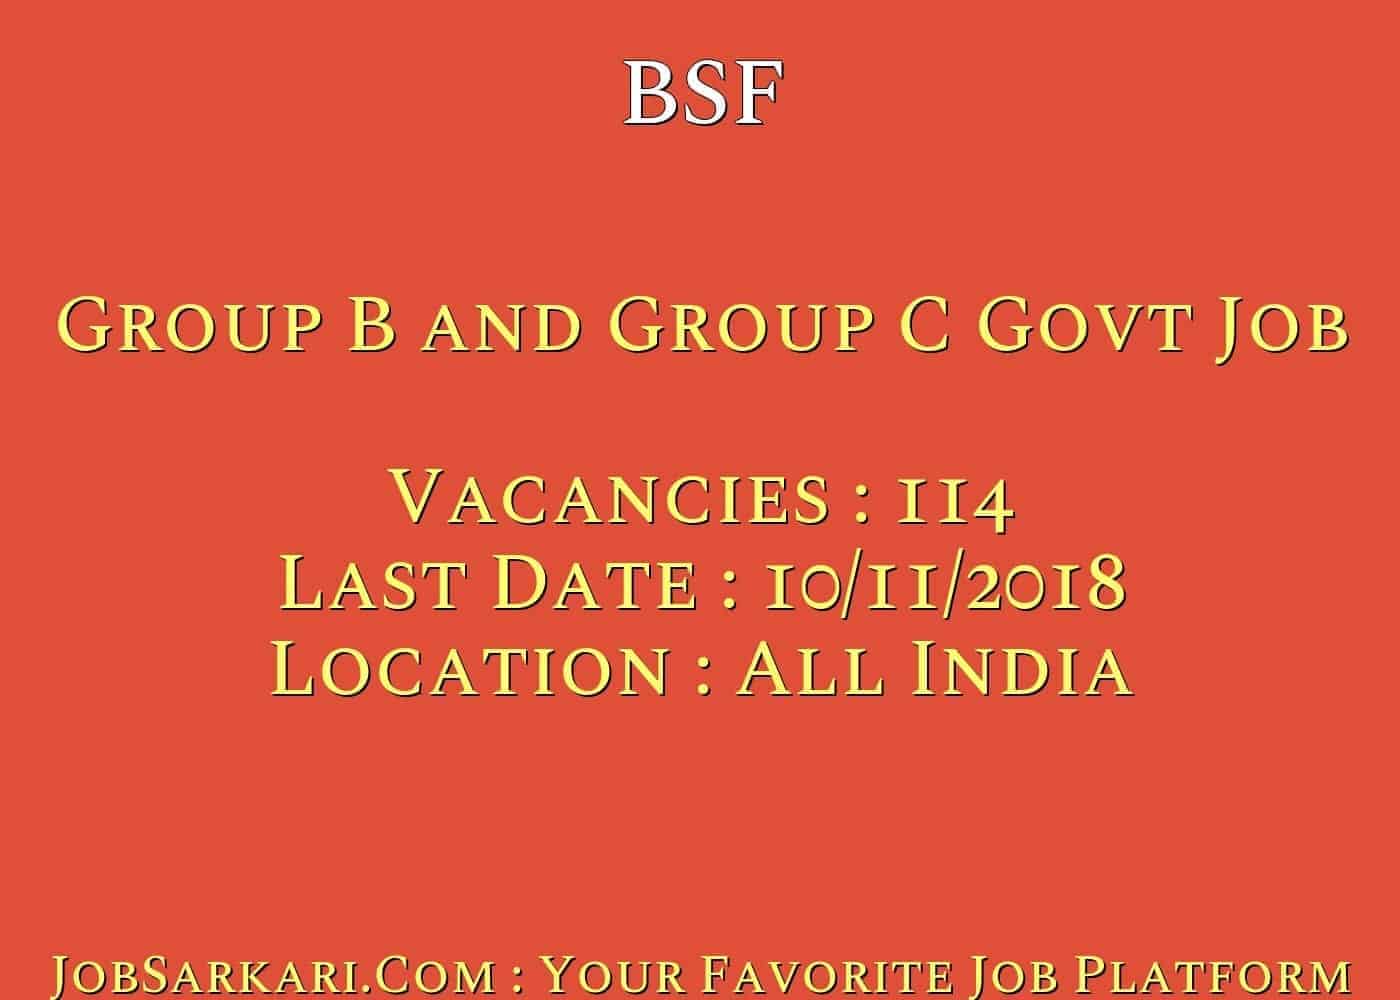 BSF Recruitment 2018 for Group B and Group C Govt Job